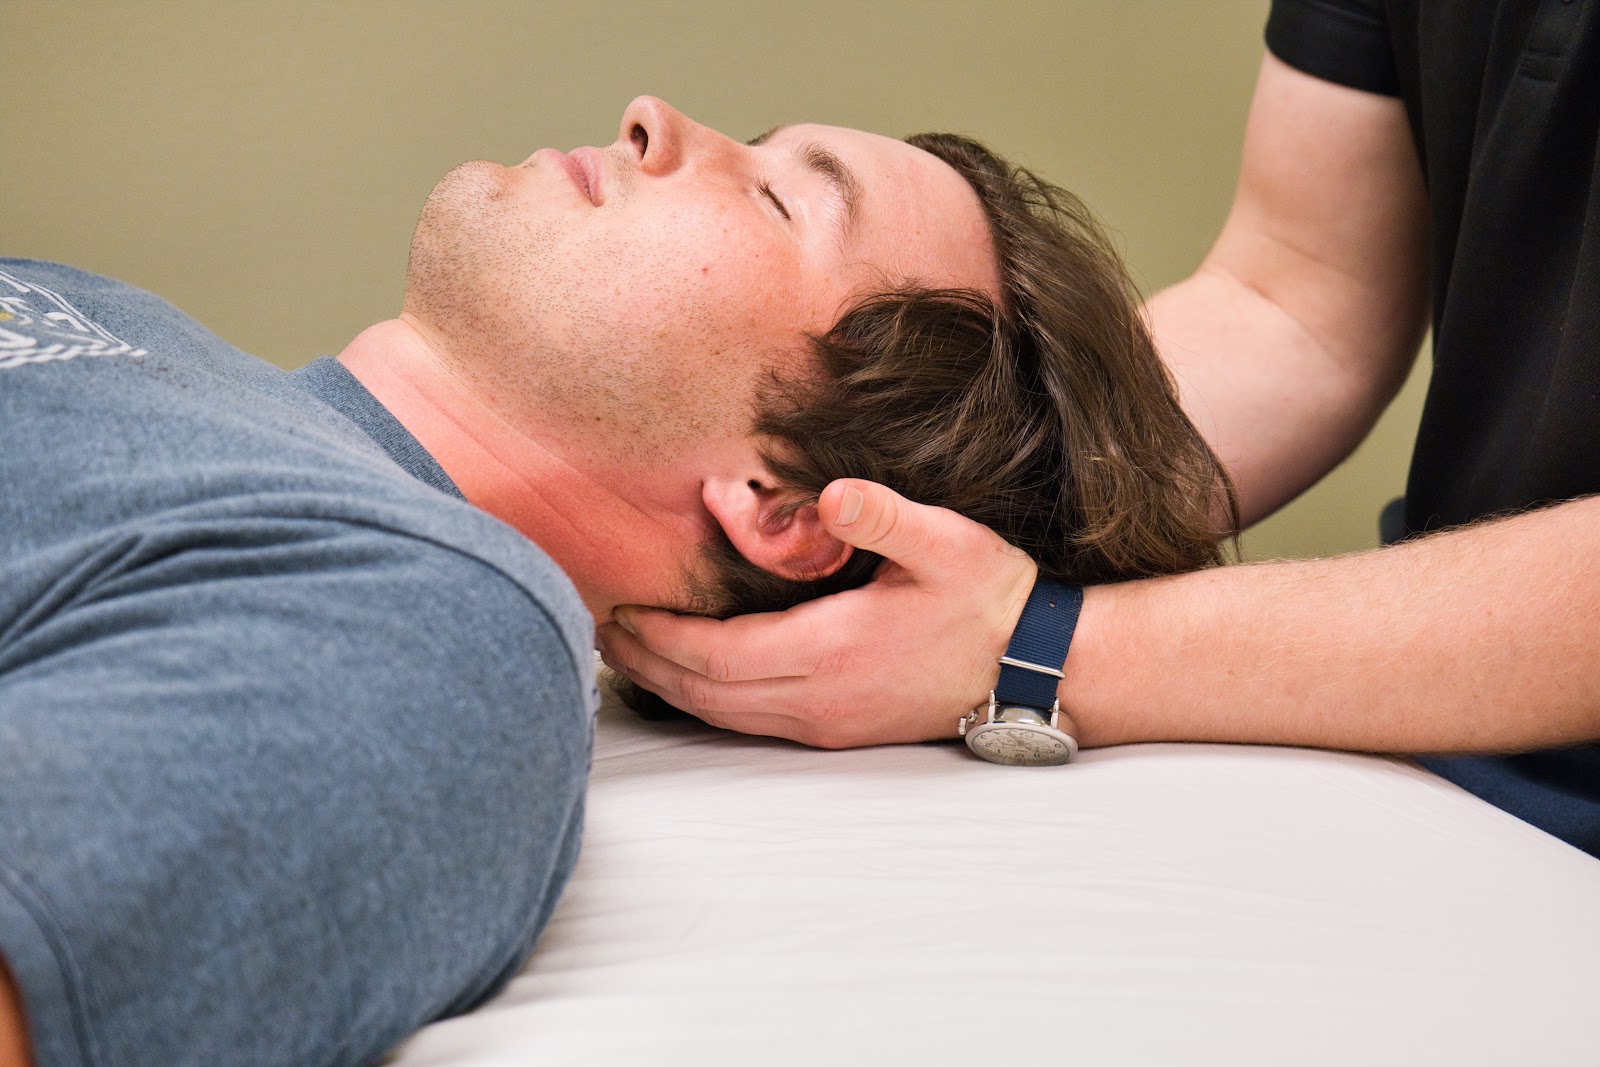 There are many concussion therapy exercises you can try at home, including self-massage of the neck, shoulders, and face.